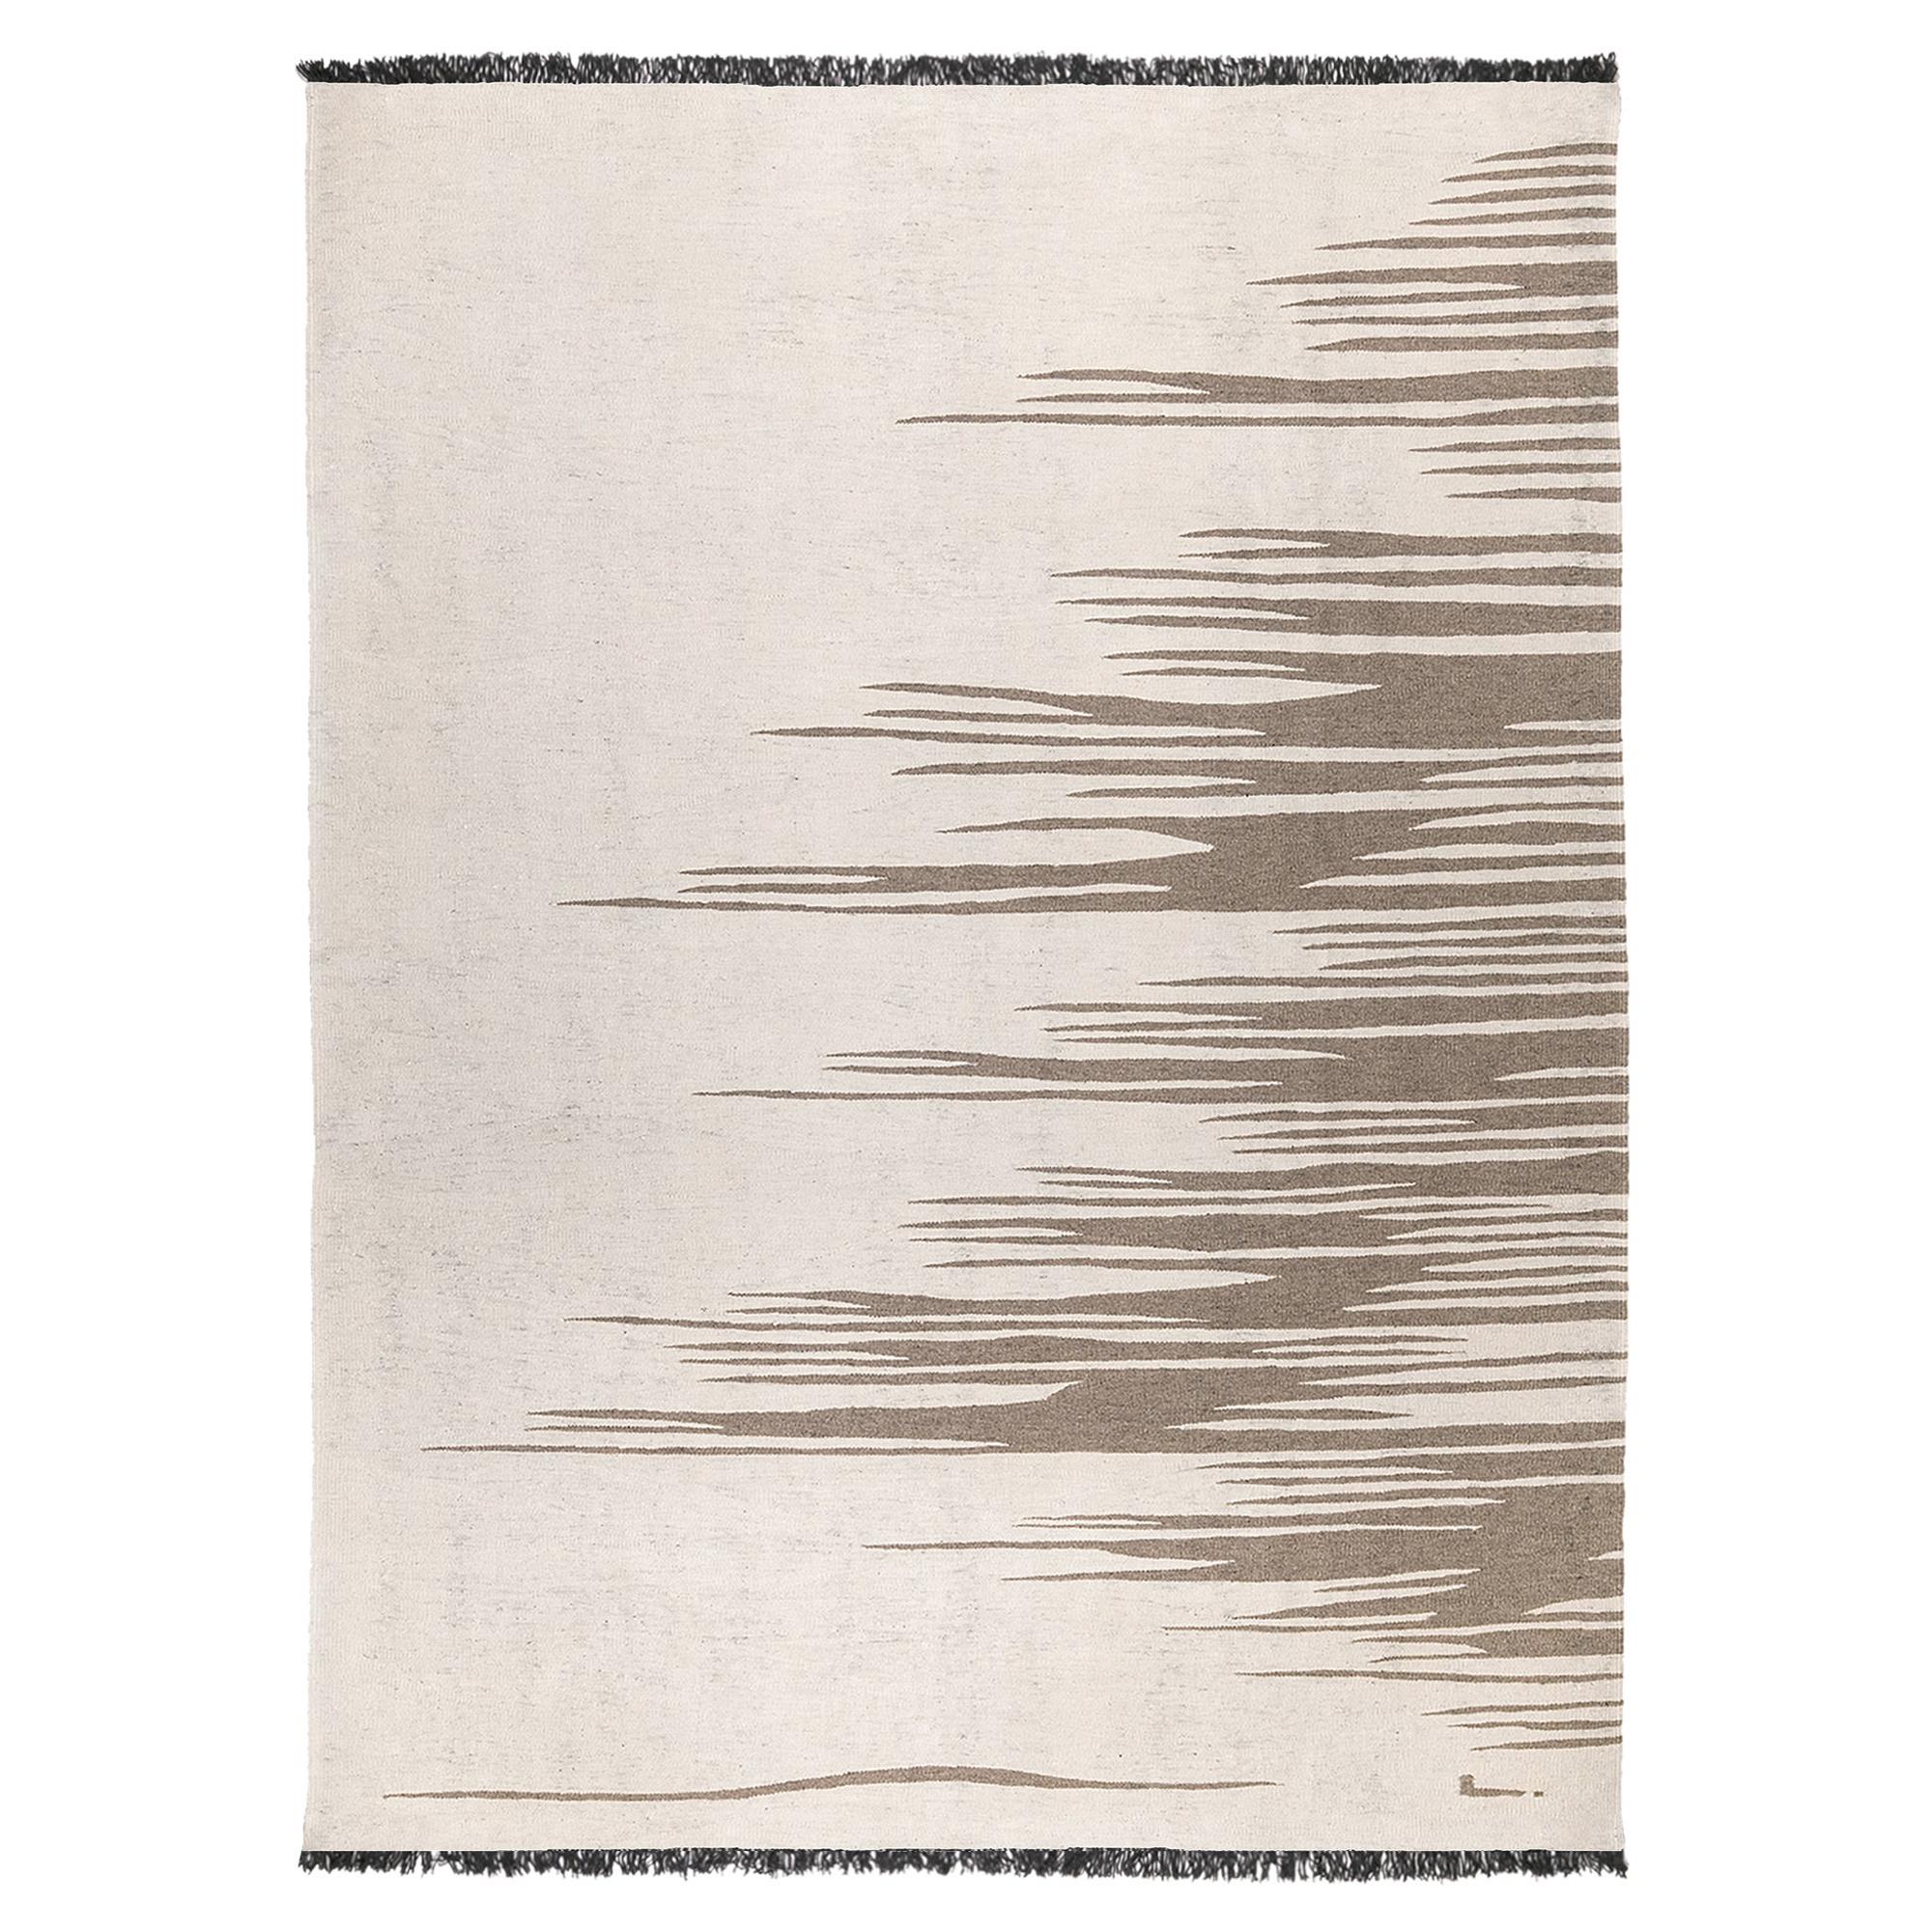 Ege No 3 Contemporary Kilim Rug Wool Handwoven Dune White and Earthy Gray For Sale